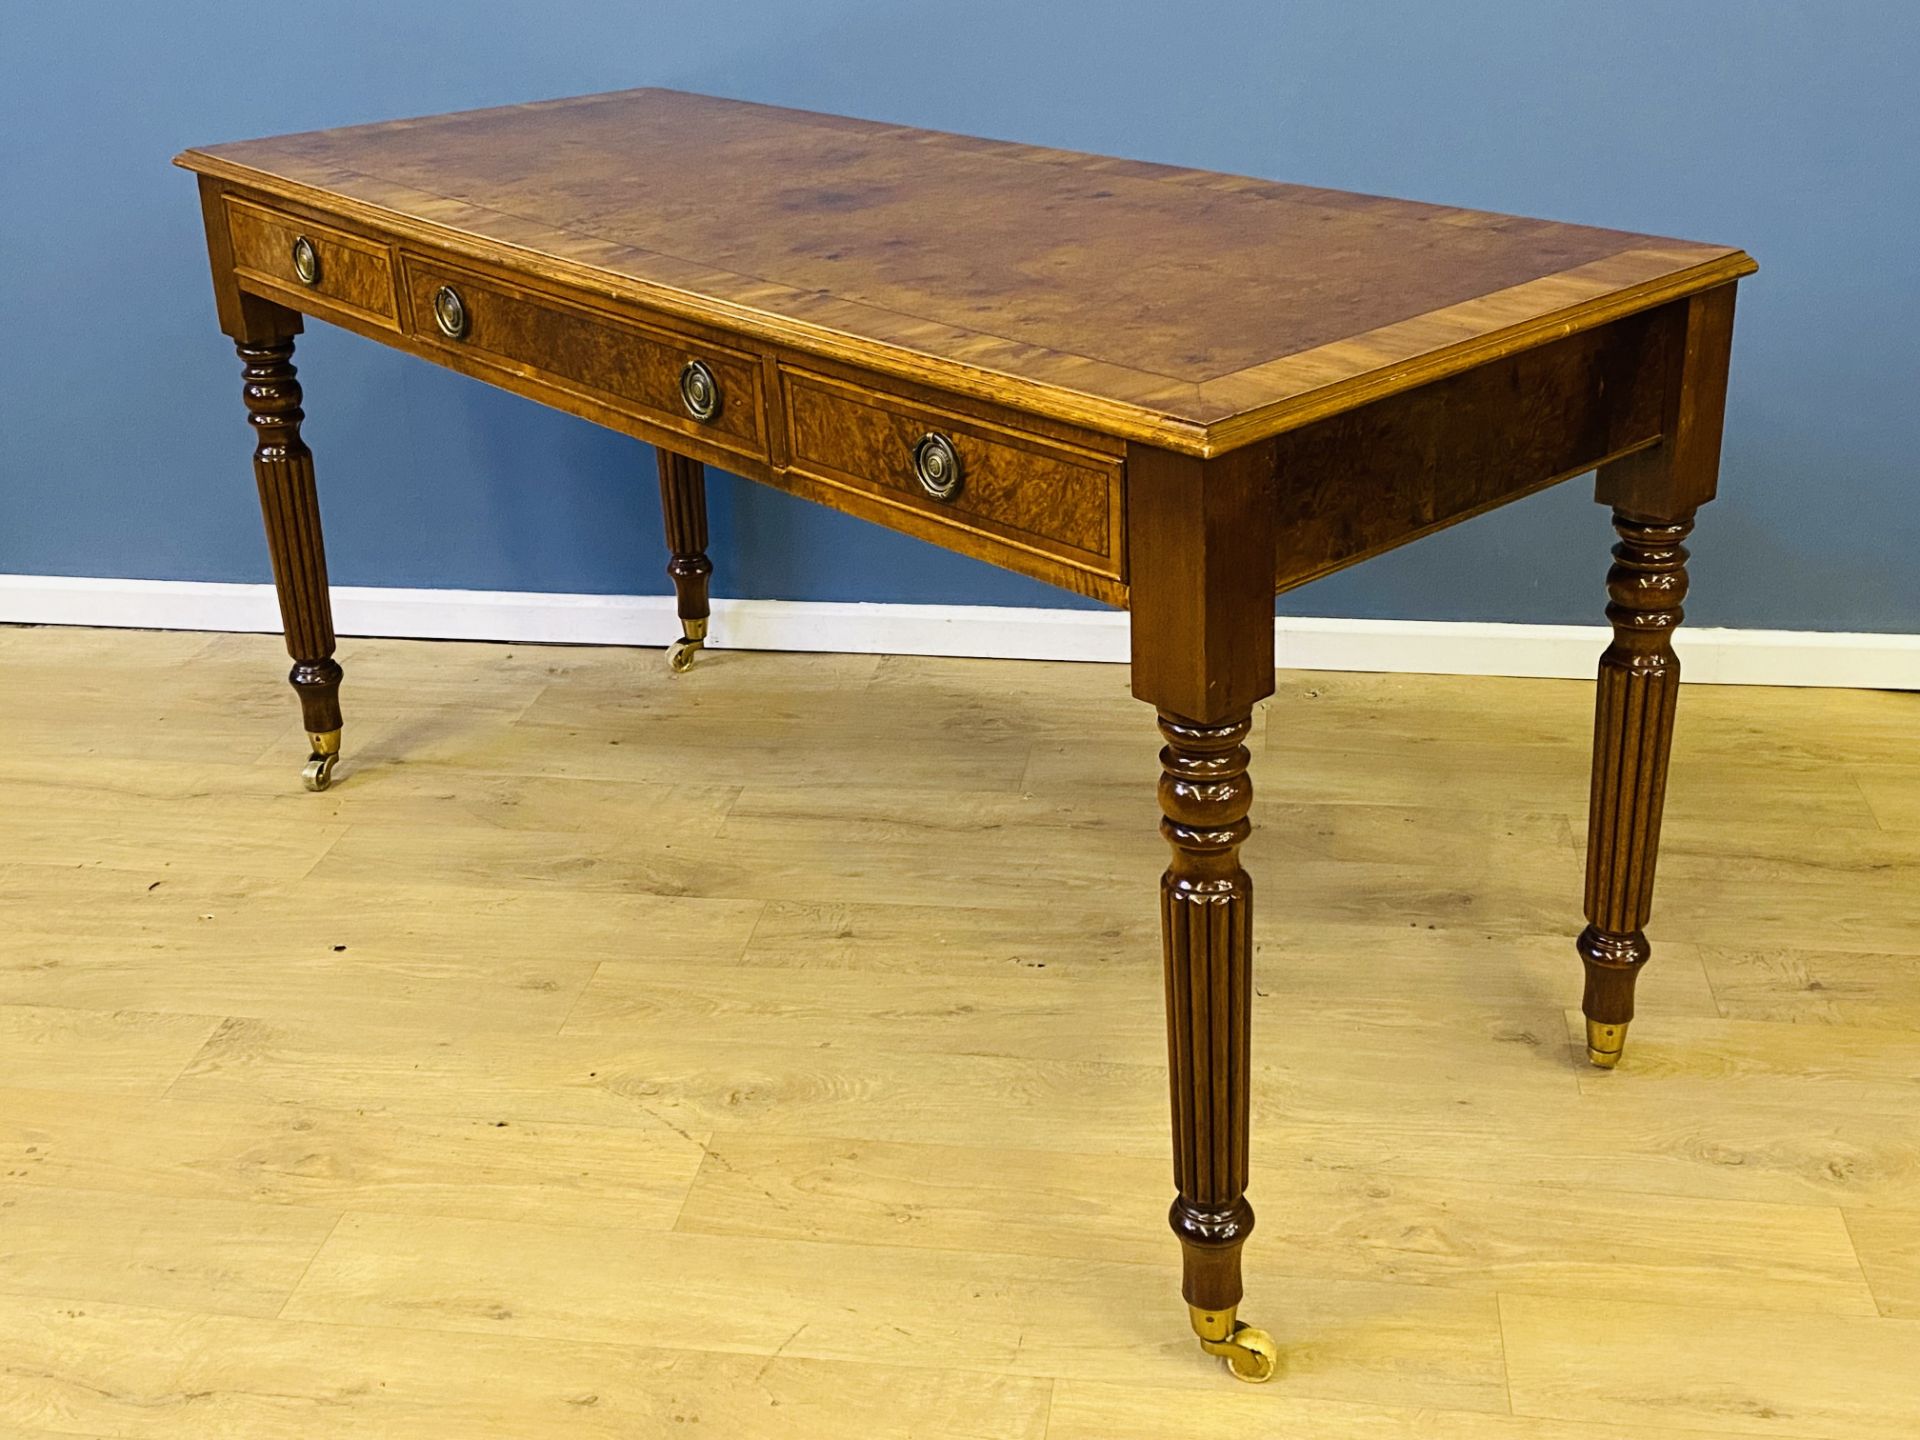 Reproduction burr walnut writing table - Image 5 of 7